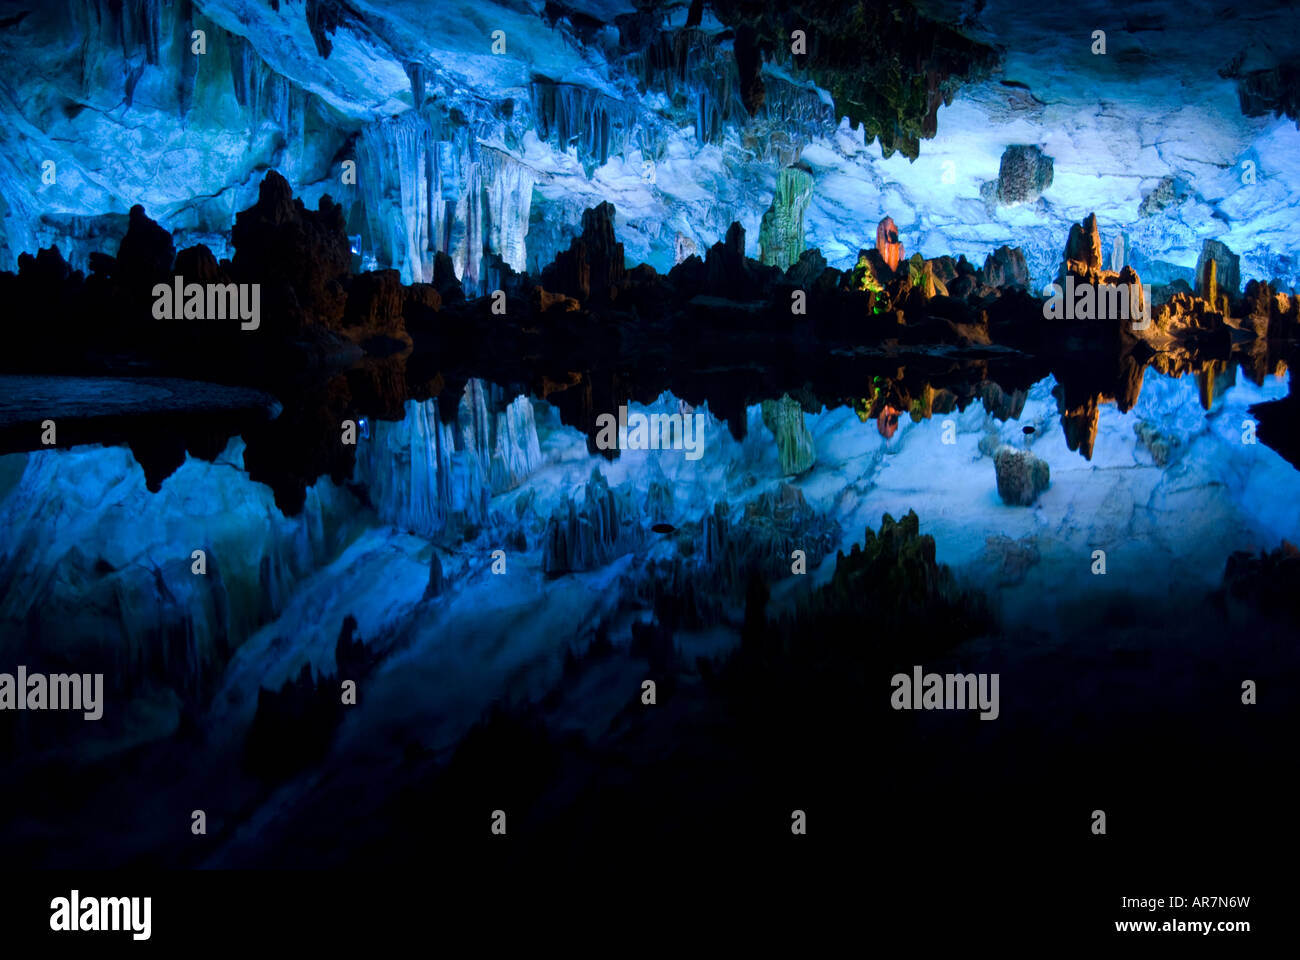 Stalactites, Stalagmites and a limestone cityscape inside the reed flute cave, Guilin, China Stock Photo